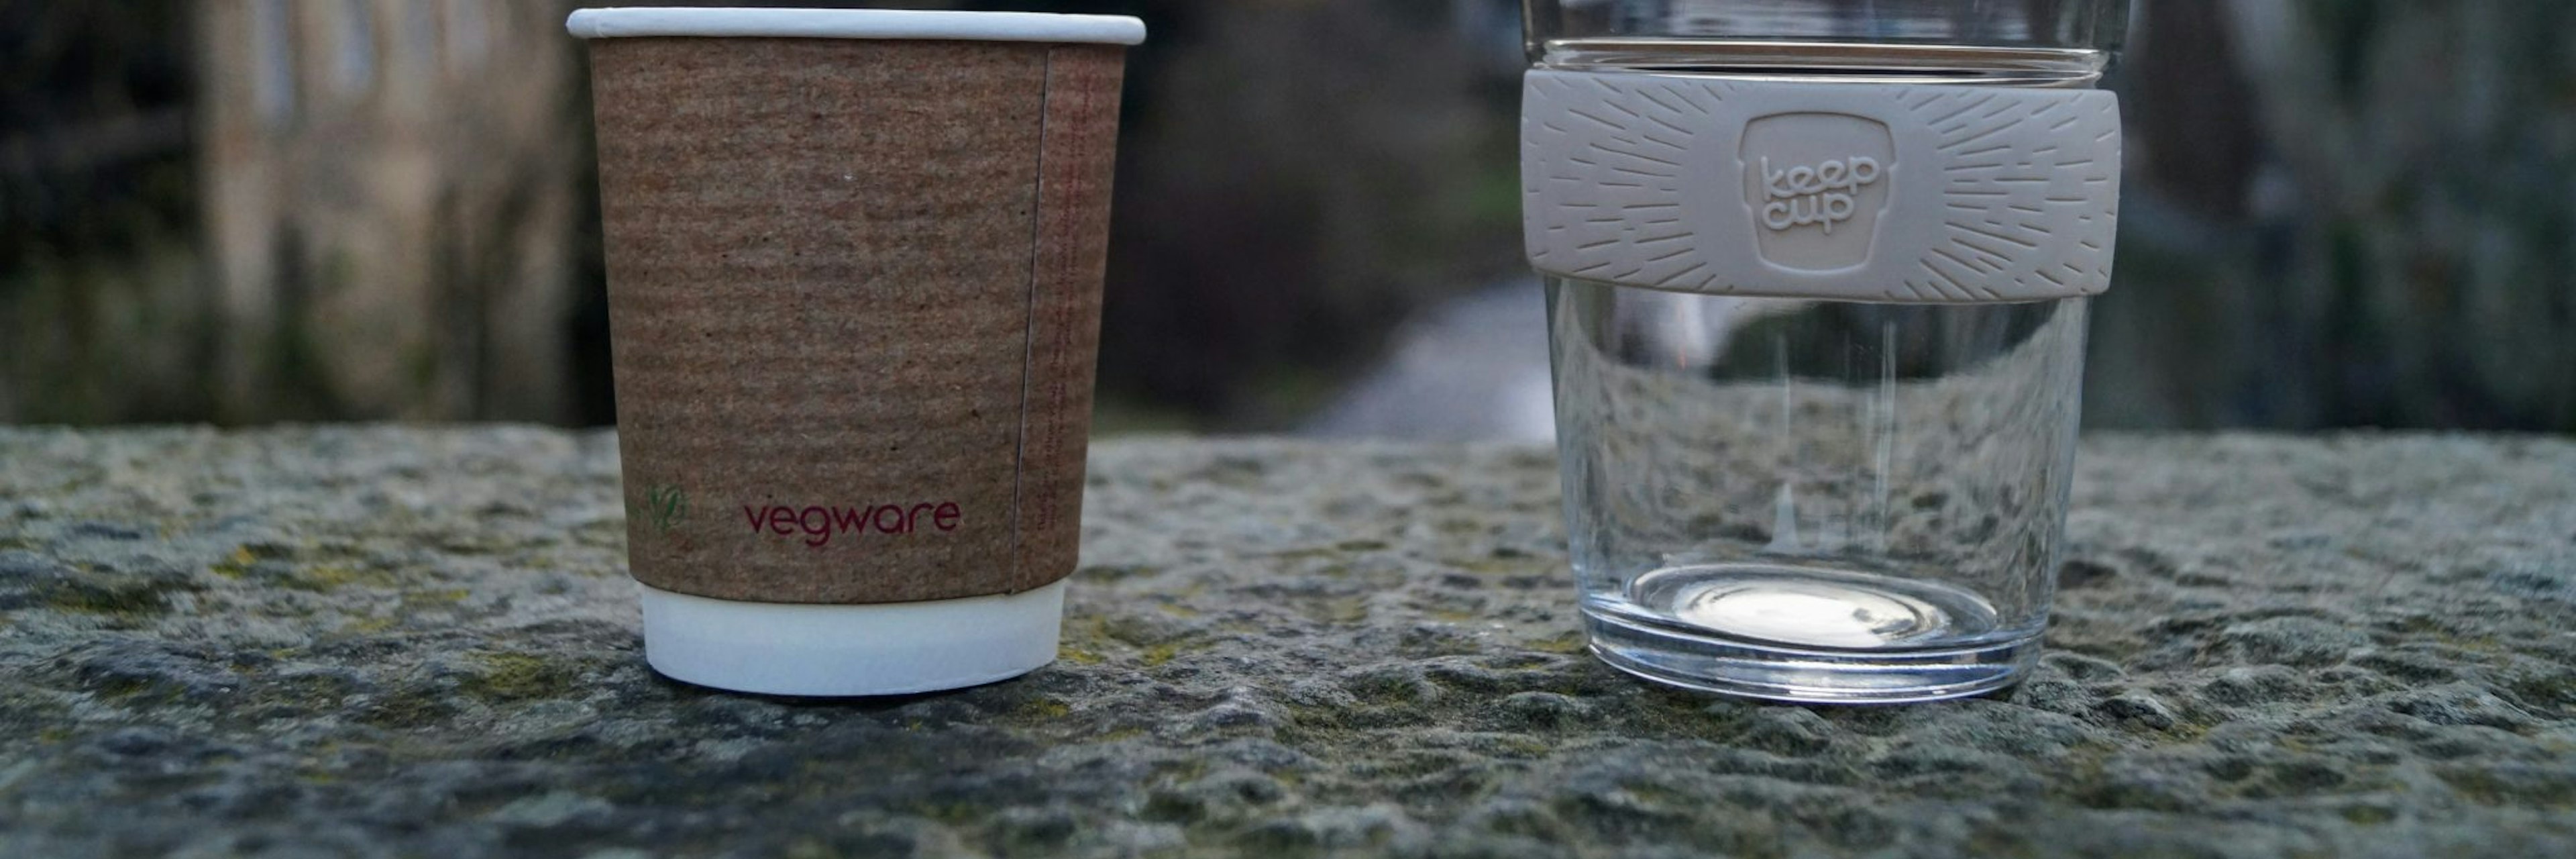 Photo of vegware and keepcup cups